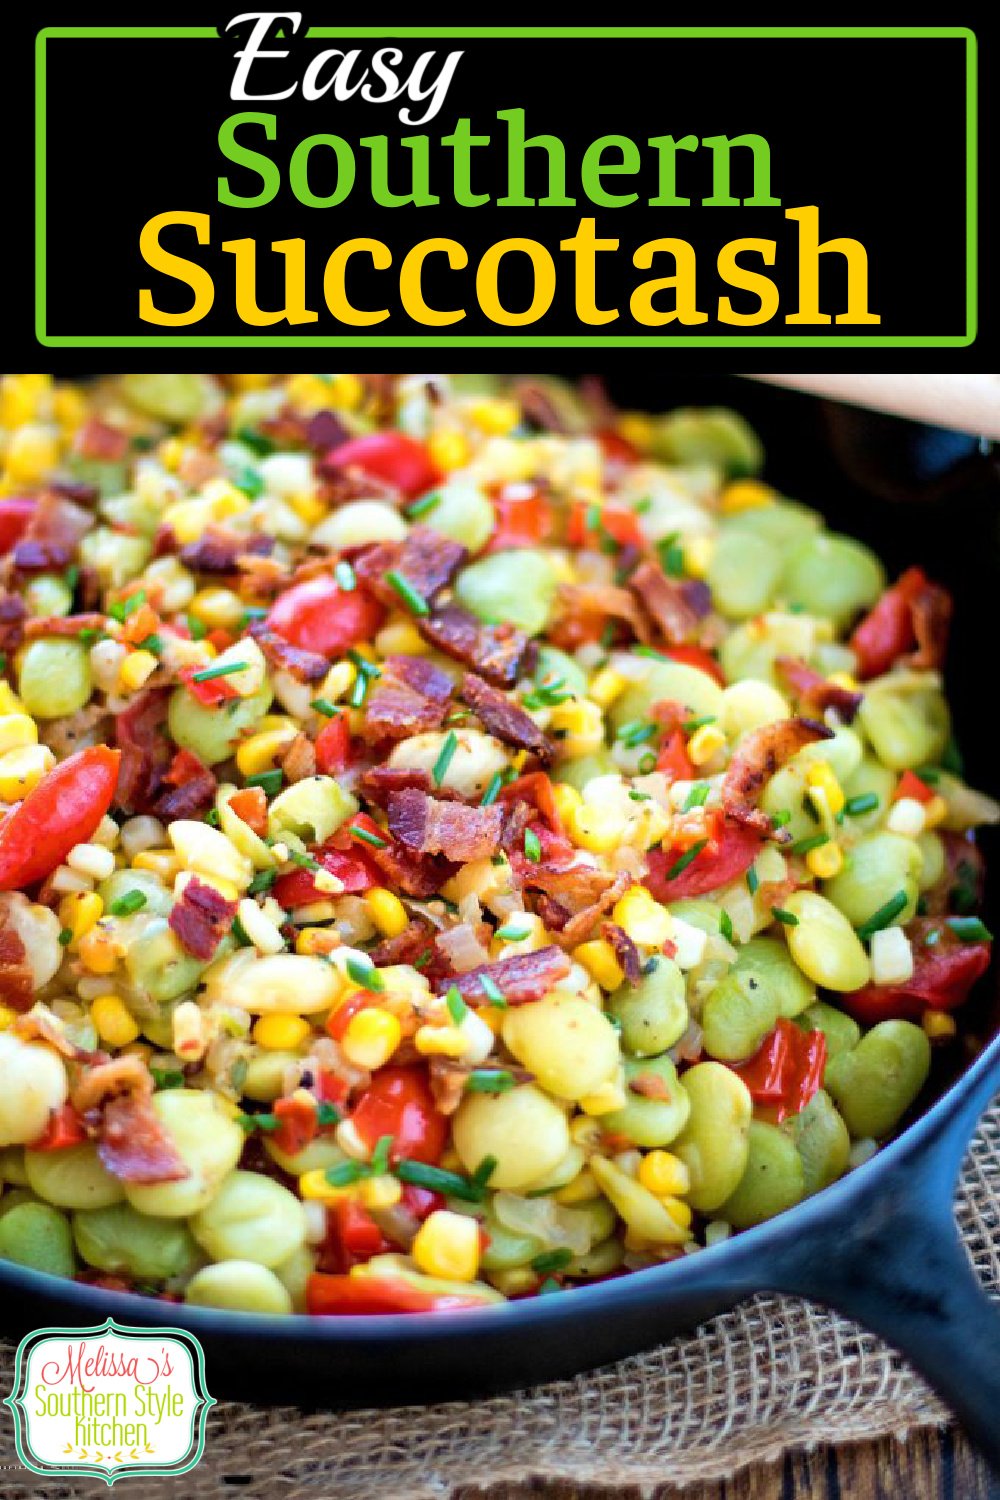 This classic summer side dish is filled to the brim with garden fresh vegetables you'll love #succotash #southernsuccotash #vegetables #sidedishrecipes #diner #dinnerideas #corn #limabeans #bacon #southernfood #southernrecipes via @melissasssk